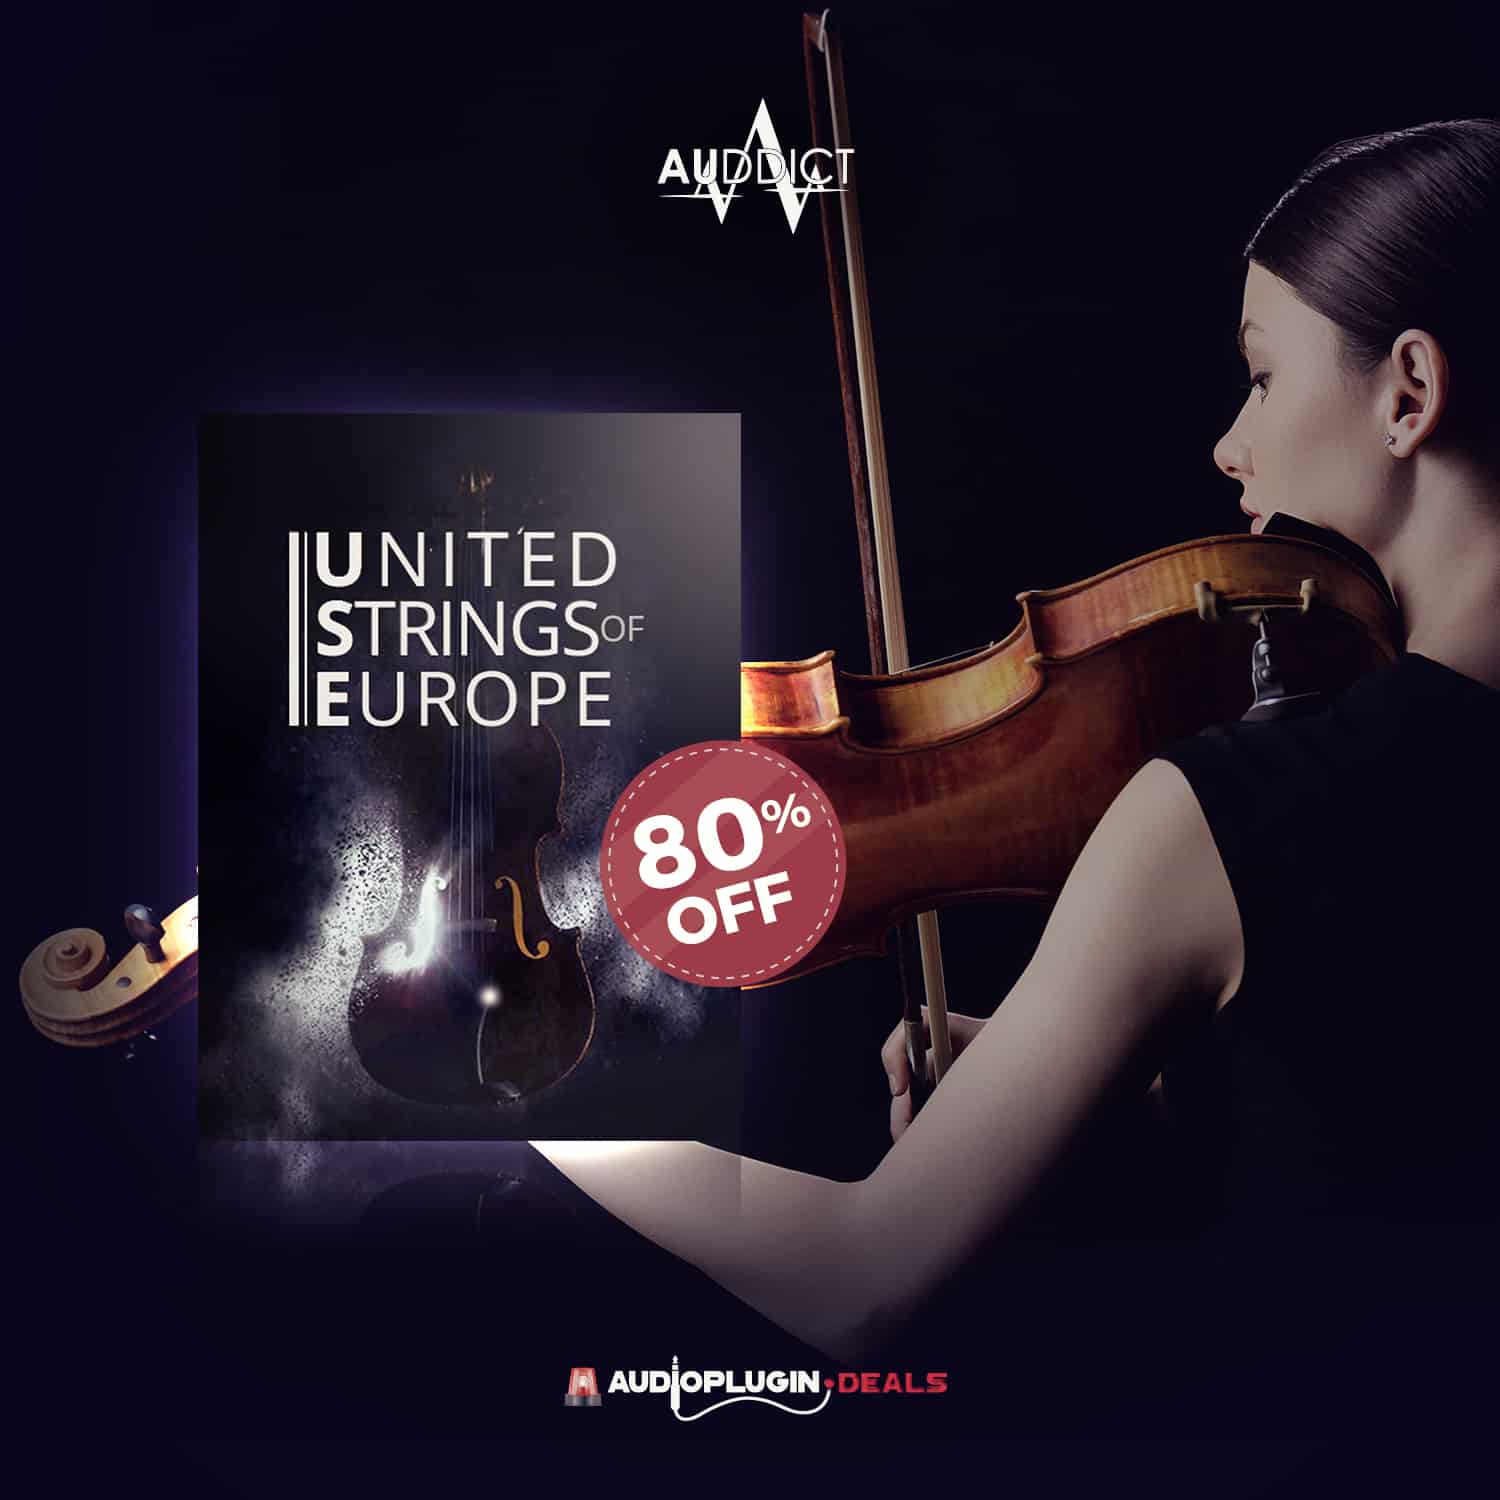 80% Off United Strings of Europe by Auddict